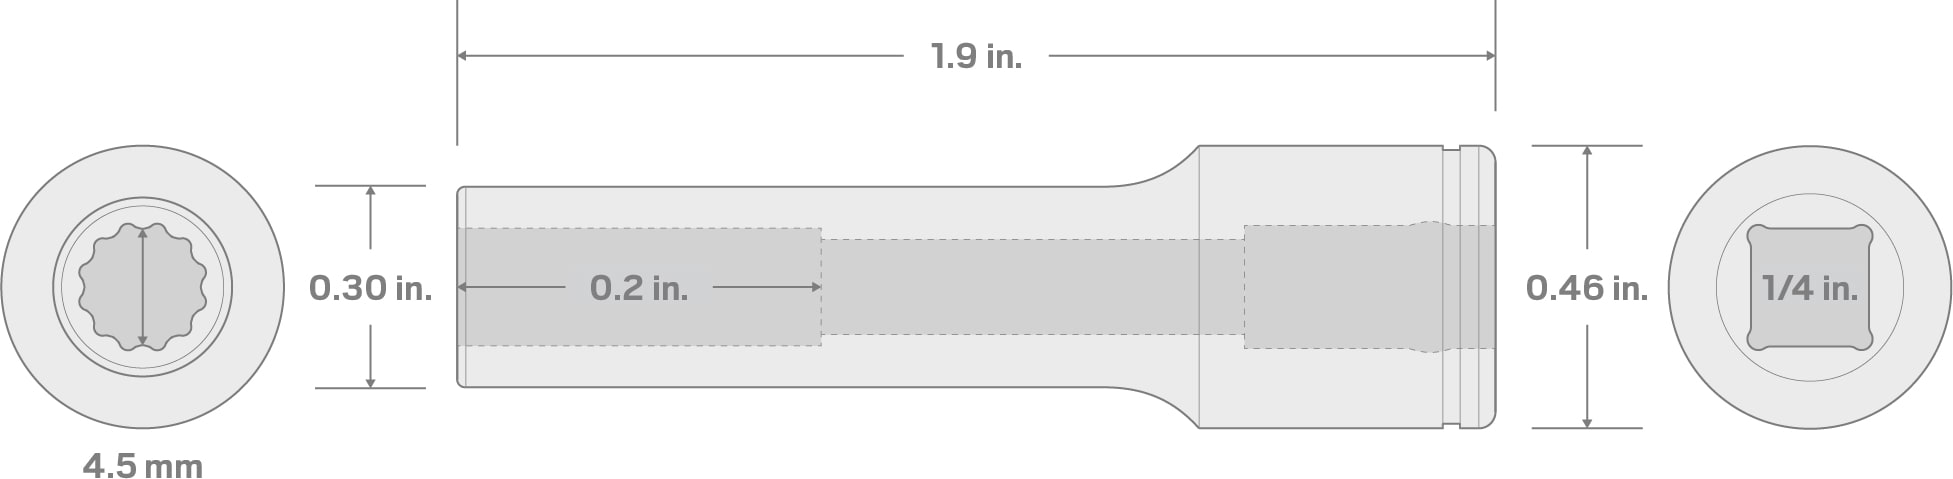 Specs for 1/4 Inch Drive x 4.5 mm Deep 12-Point Socket